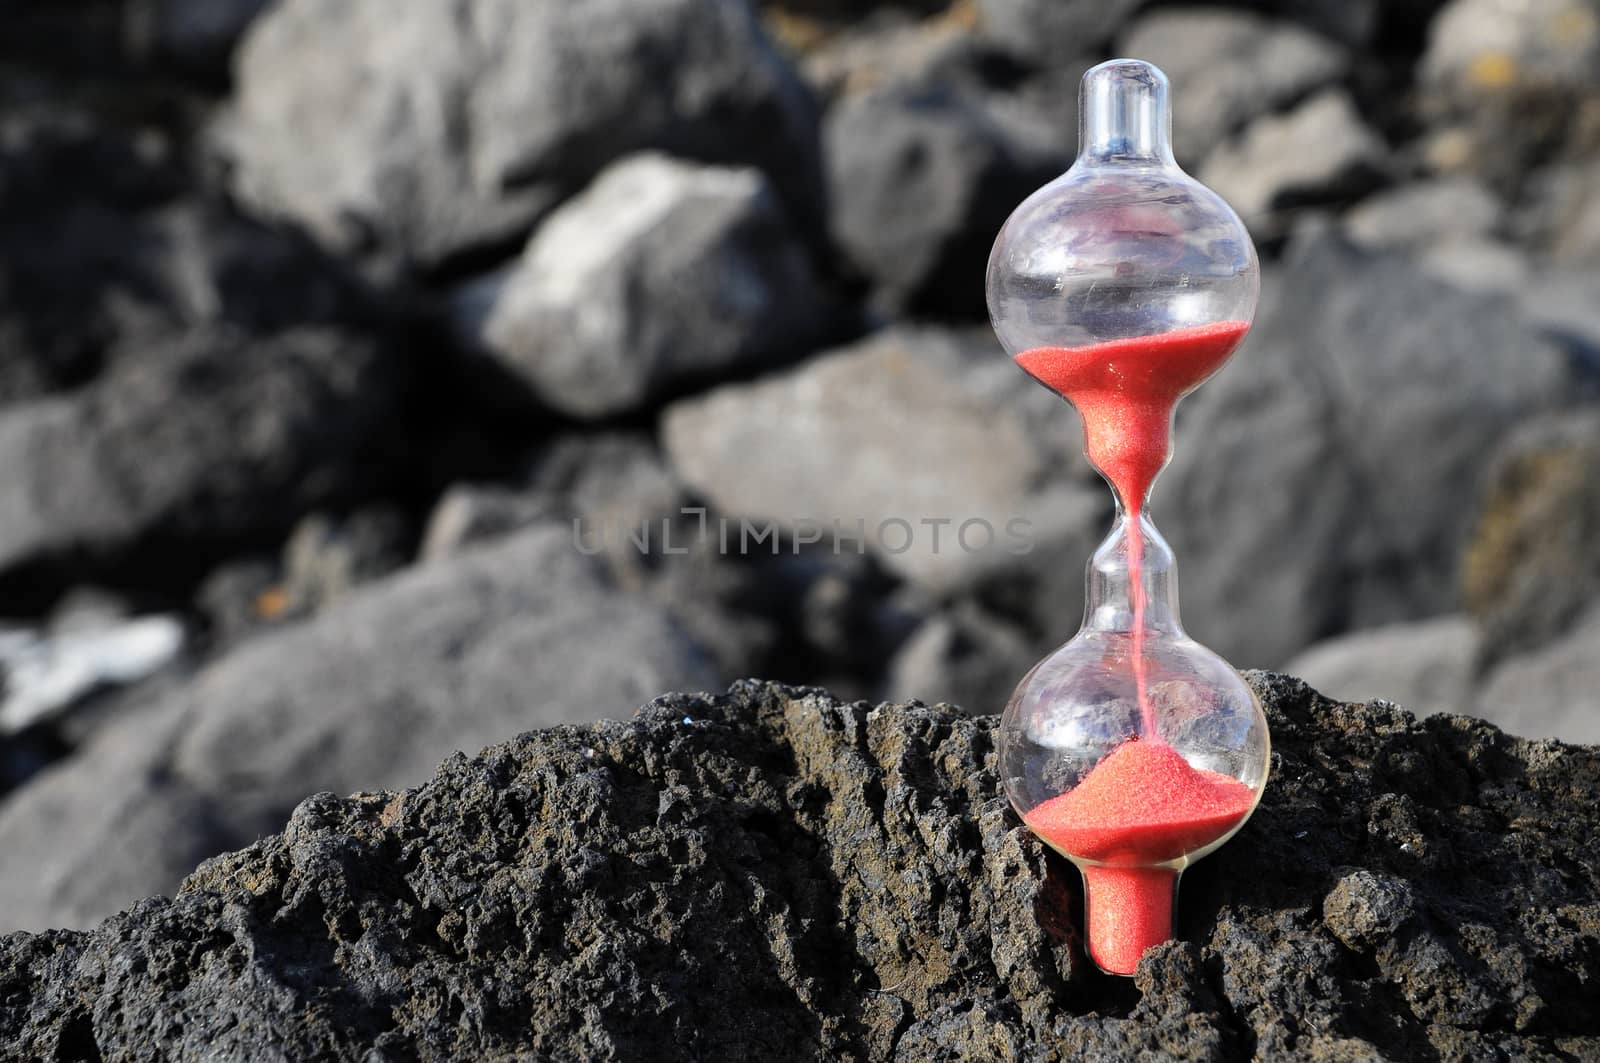 Hourglass Abandoned  by underworld